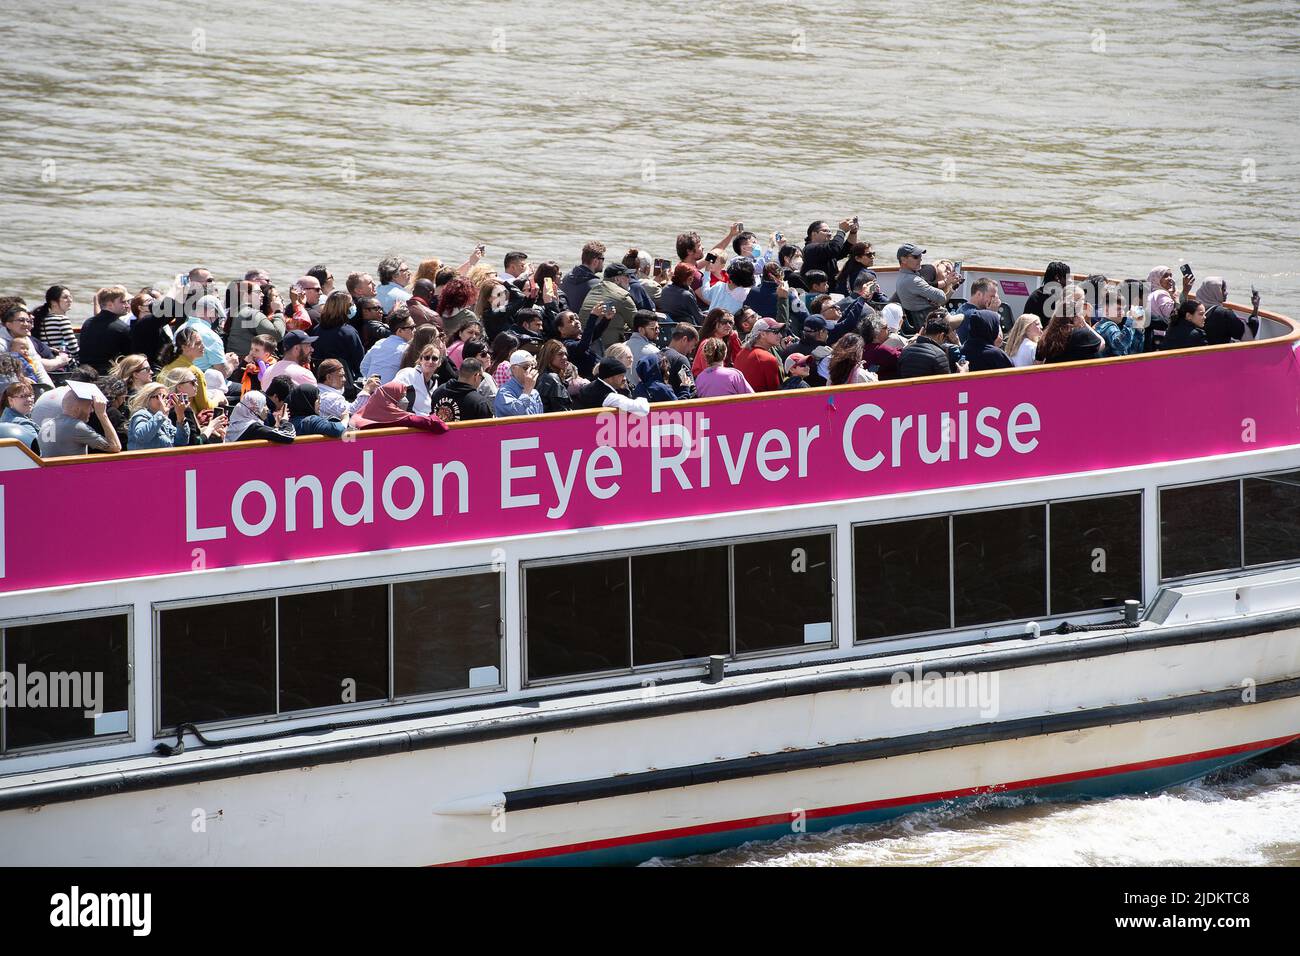 Westminster, London, UK. 8th June, 2022. A London Eye River Cruise on the River Thames takes tourists and visitors on a cruise along the shoreline at Westminster. Credit: Maureen McLean/Alamy Stock Photo